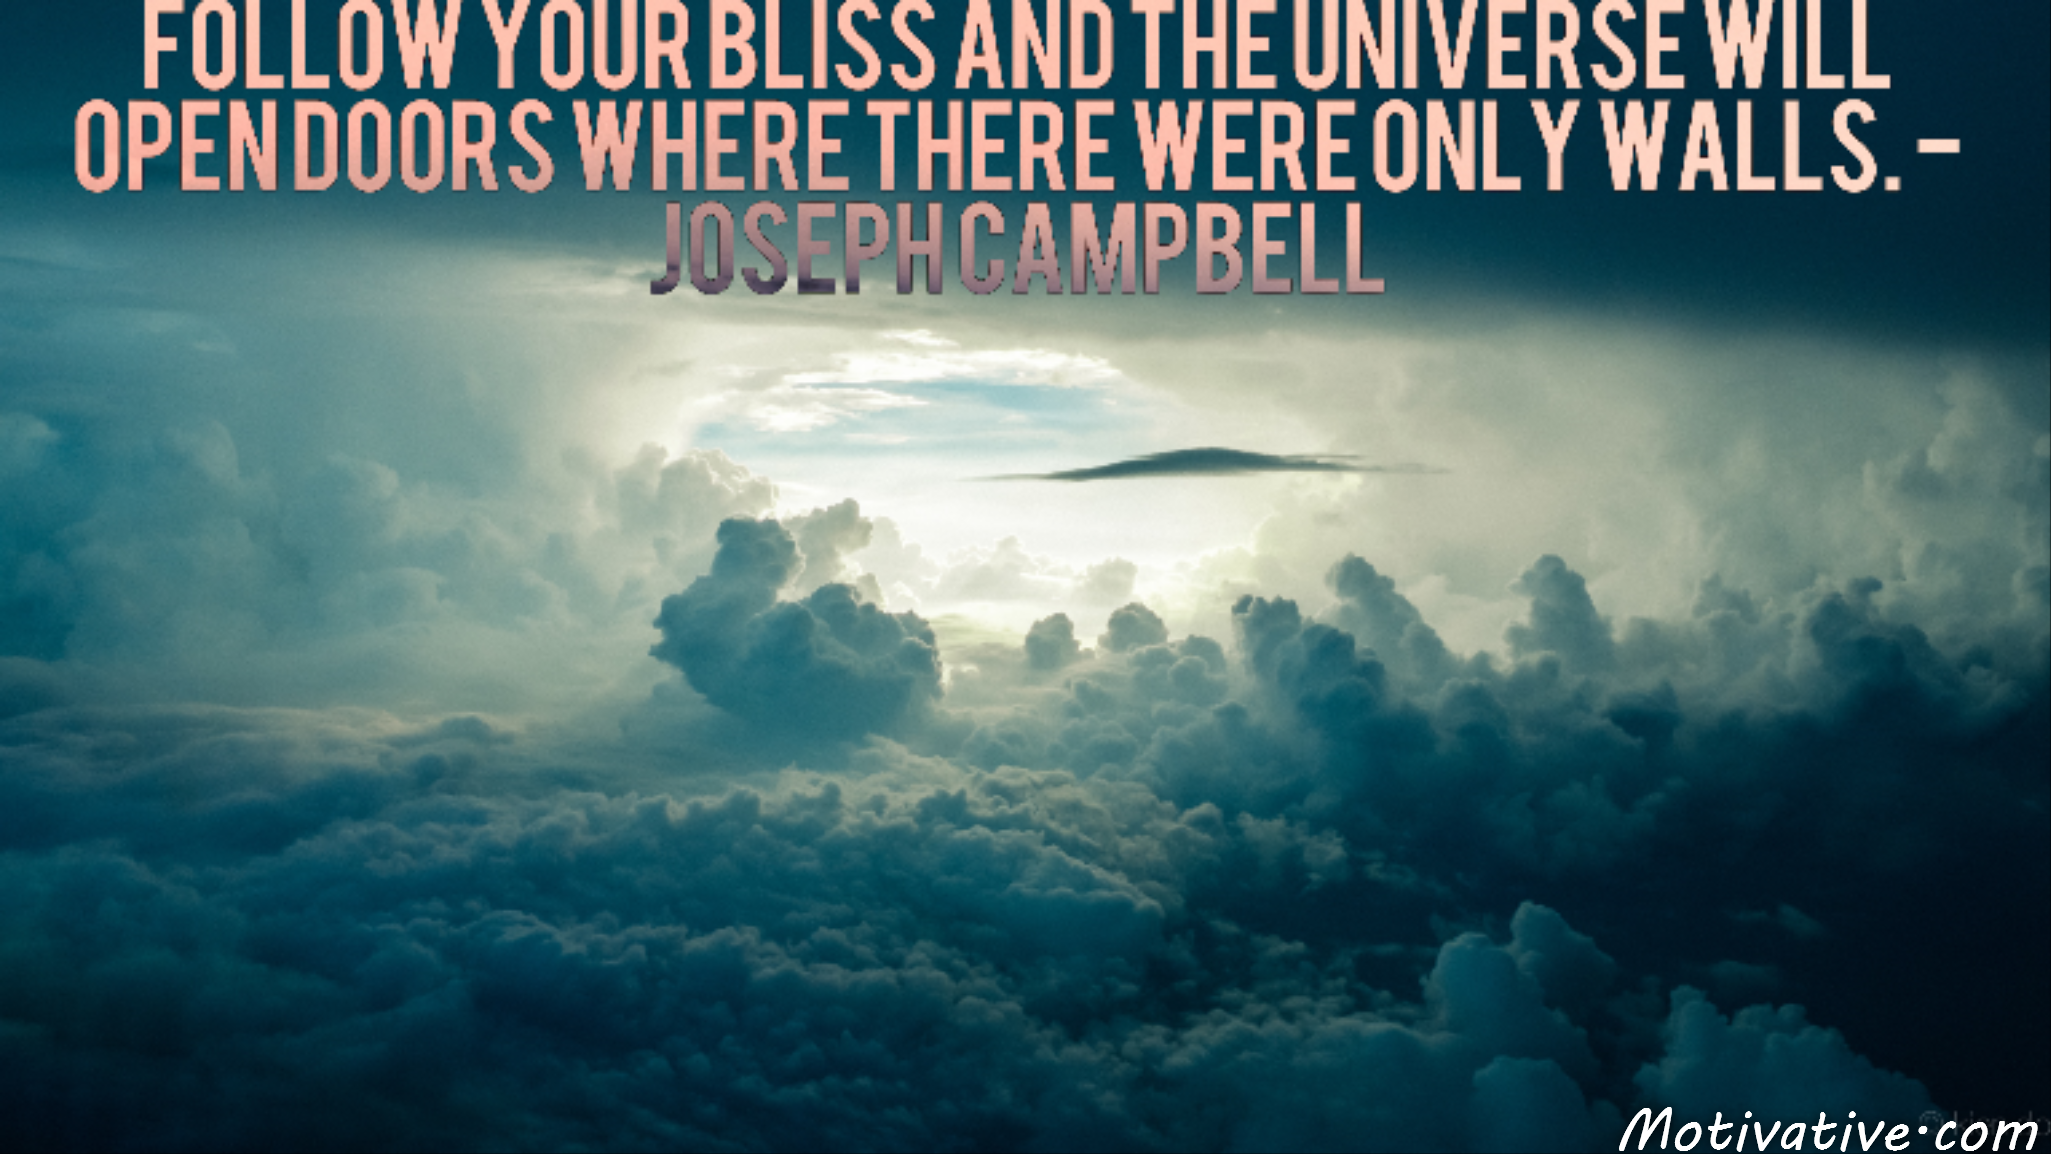 Follow your bliss and the universe will open doors where there were only walls. – Joseph Campbell